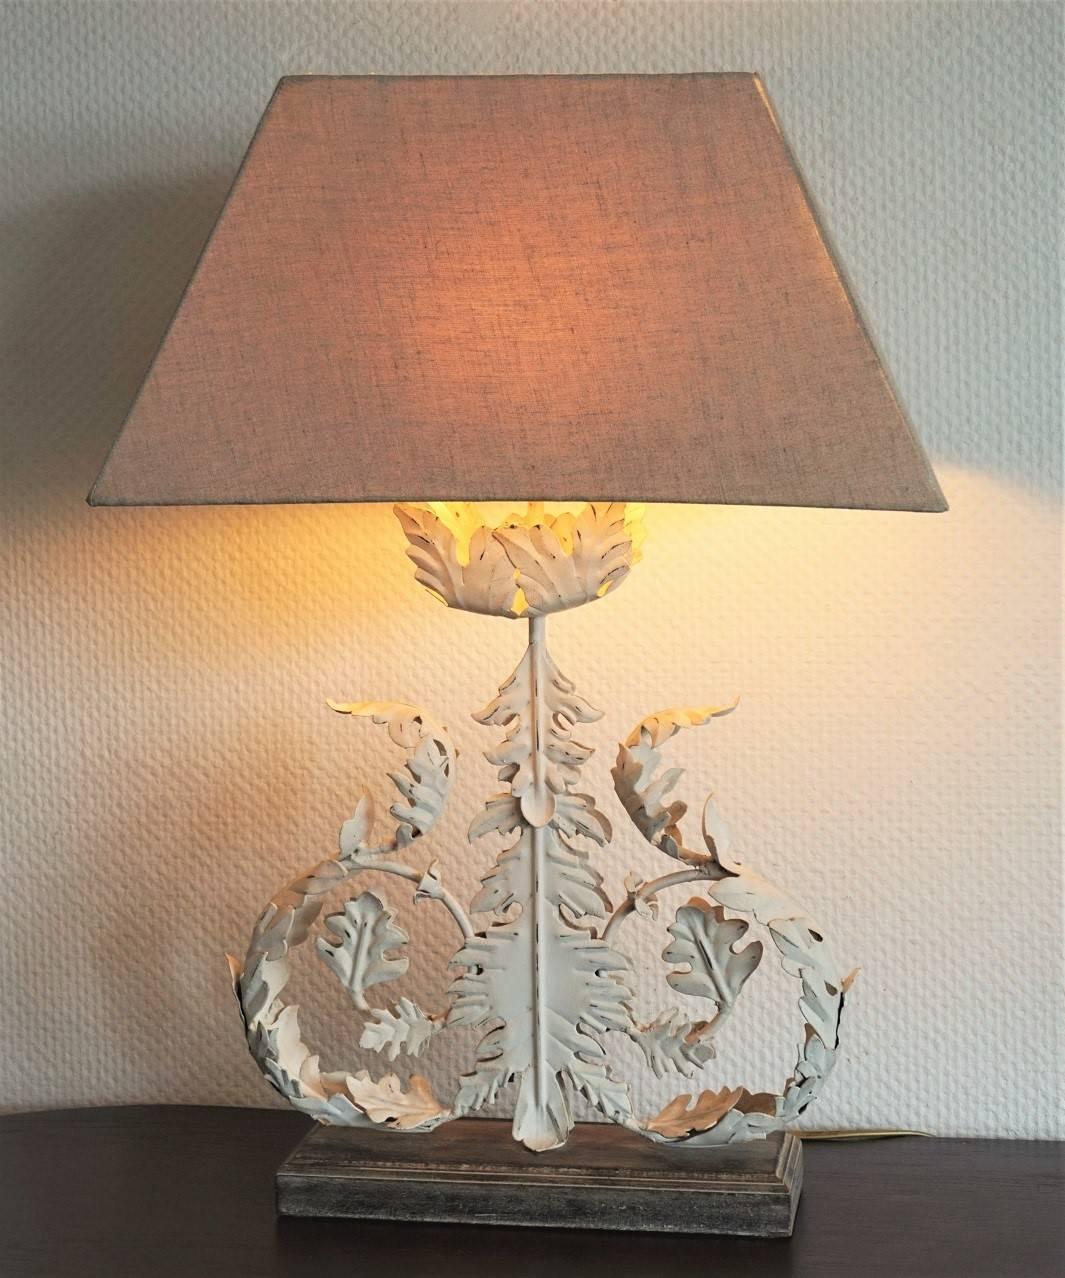 Large carved iron and painted foliage table lamp on wooden base, linen shade included, circa 1970.
One E27 light bulb holder
Height with shade 26 inches (66cm)
Width with shade 17.75 inches (45 cm)
Wooden base 11.75 inches wide, 3.75 inches deep